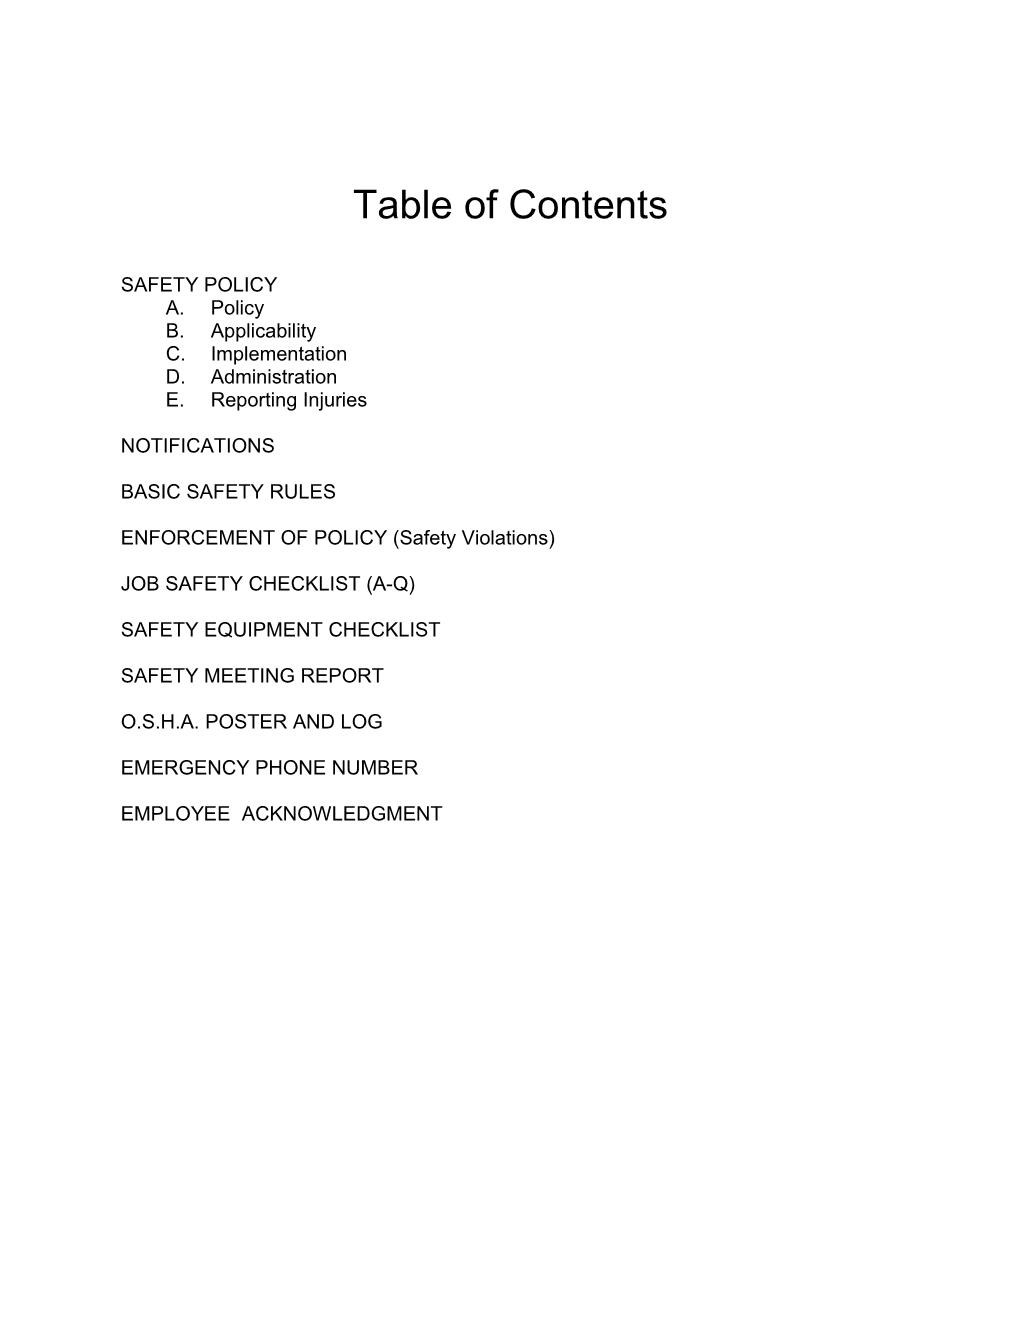 Table of Contents s374